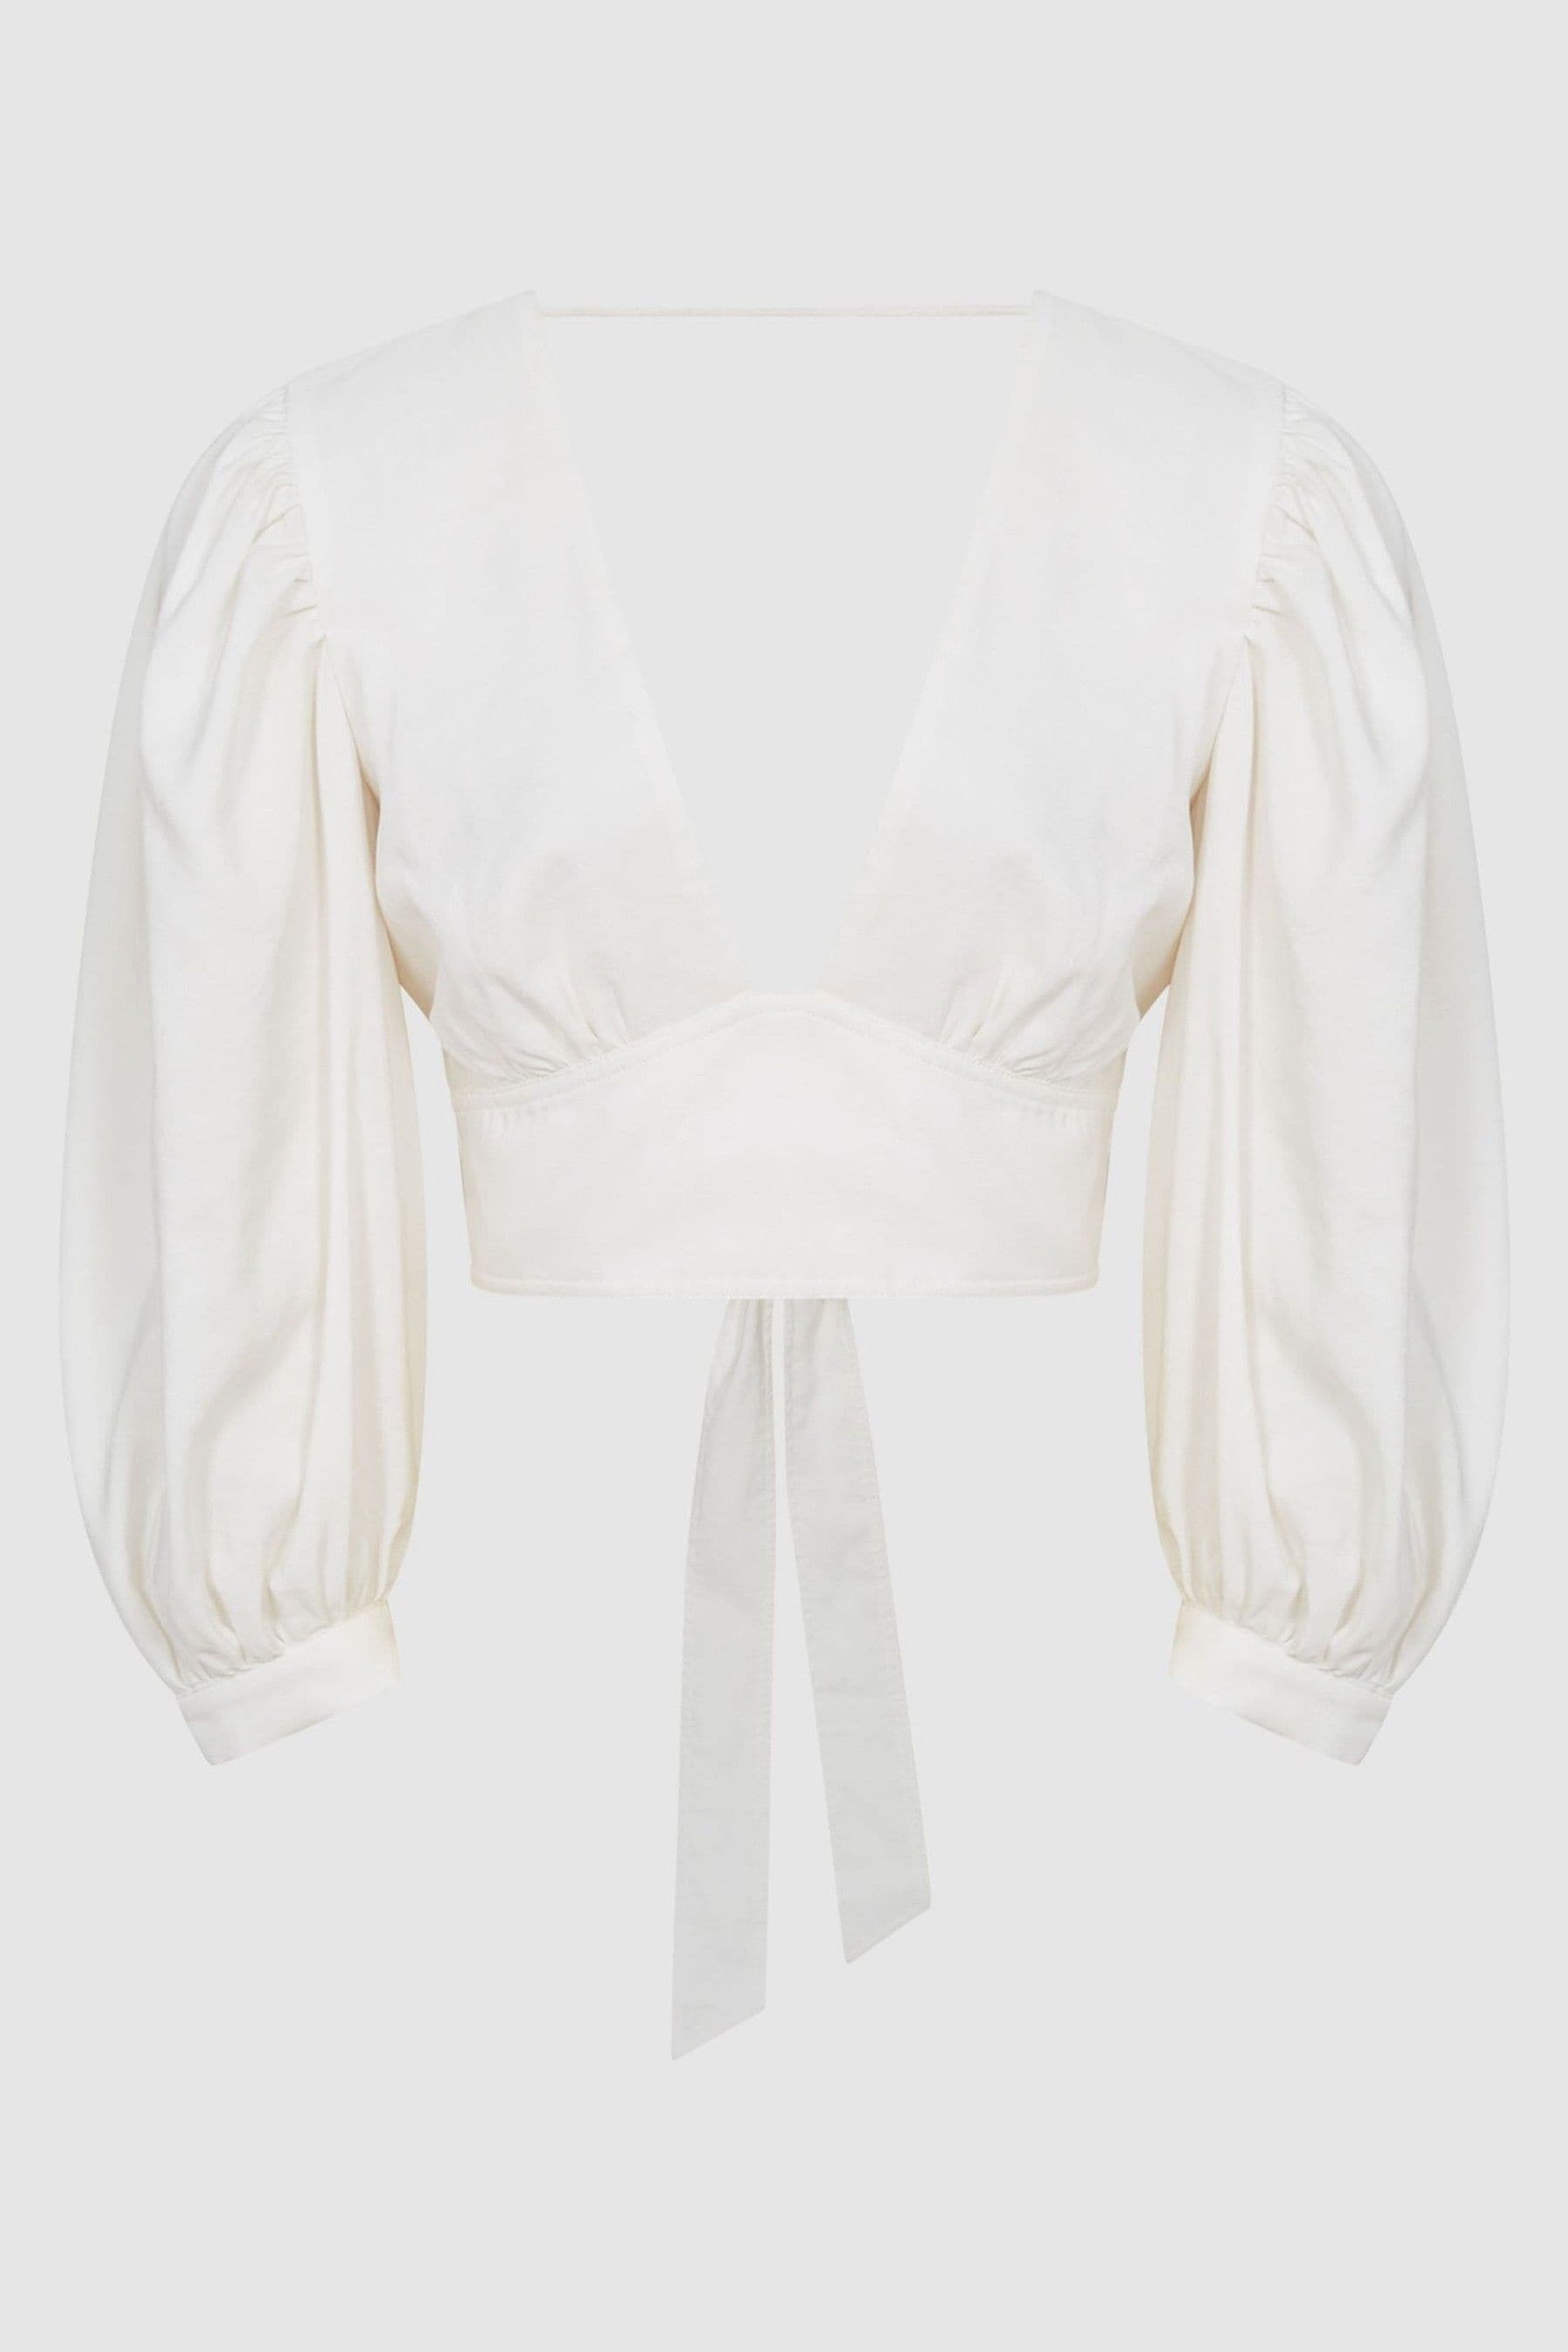 Buy Reiss White Ava Bow Back Co-ord Crop Top from the Next UK online shop